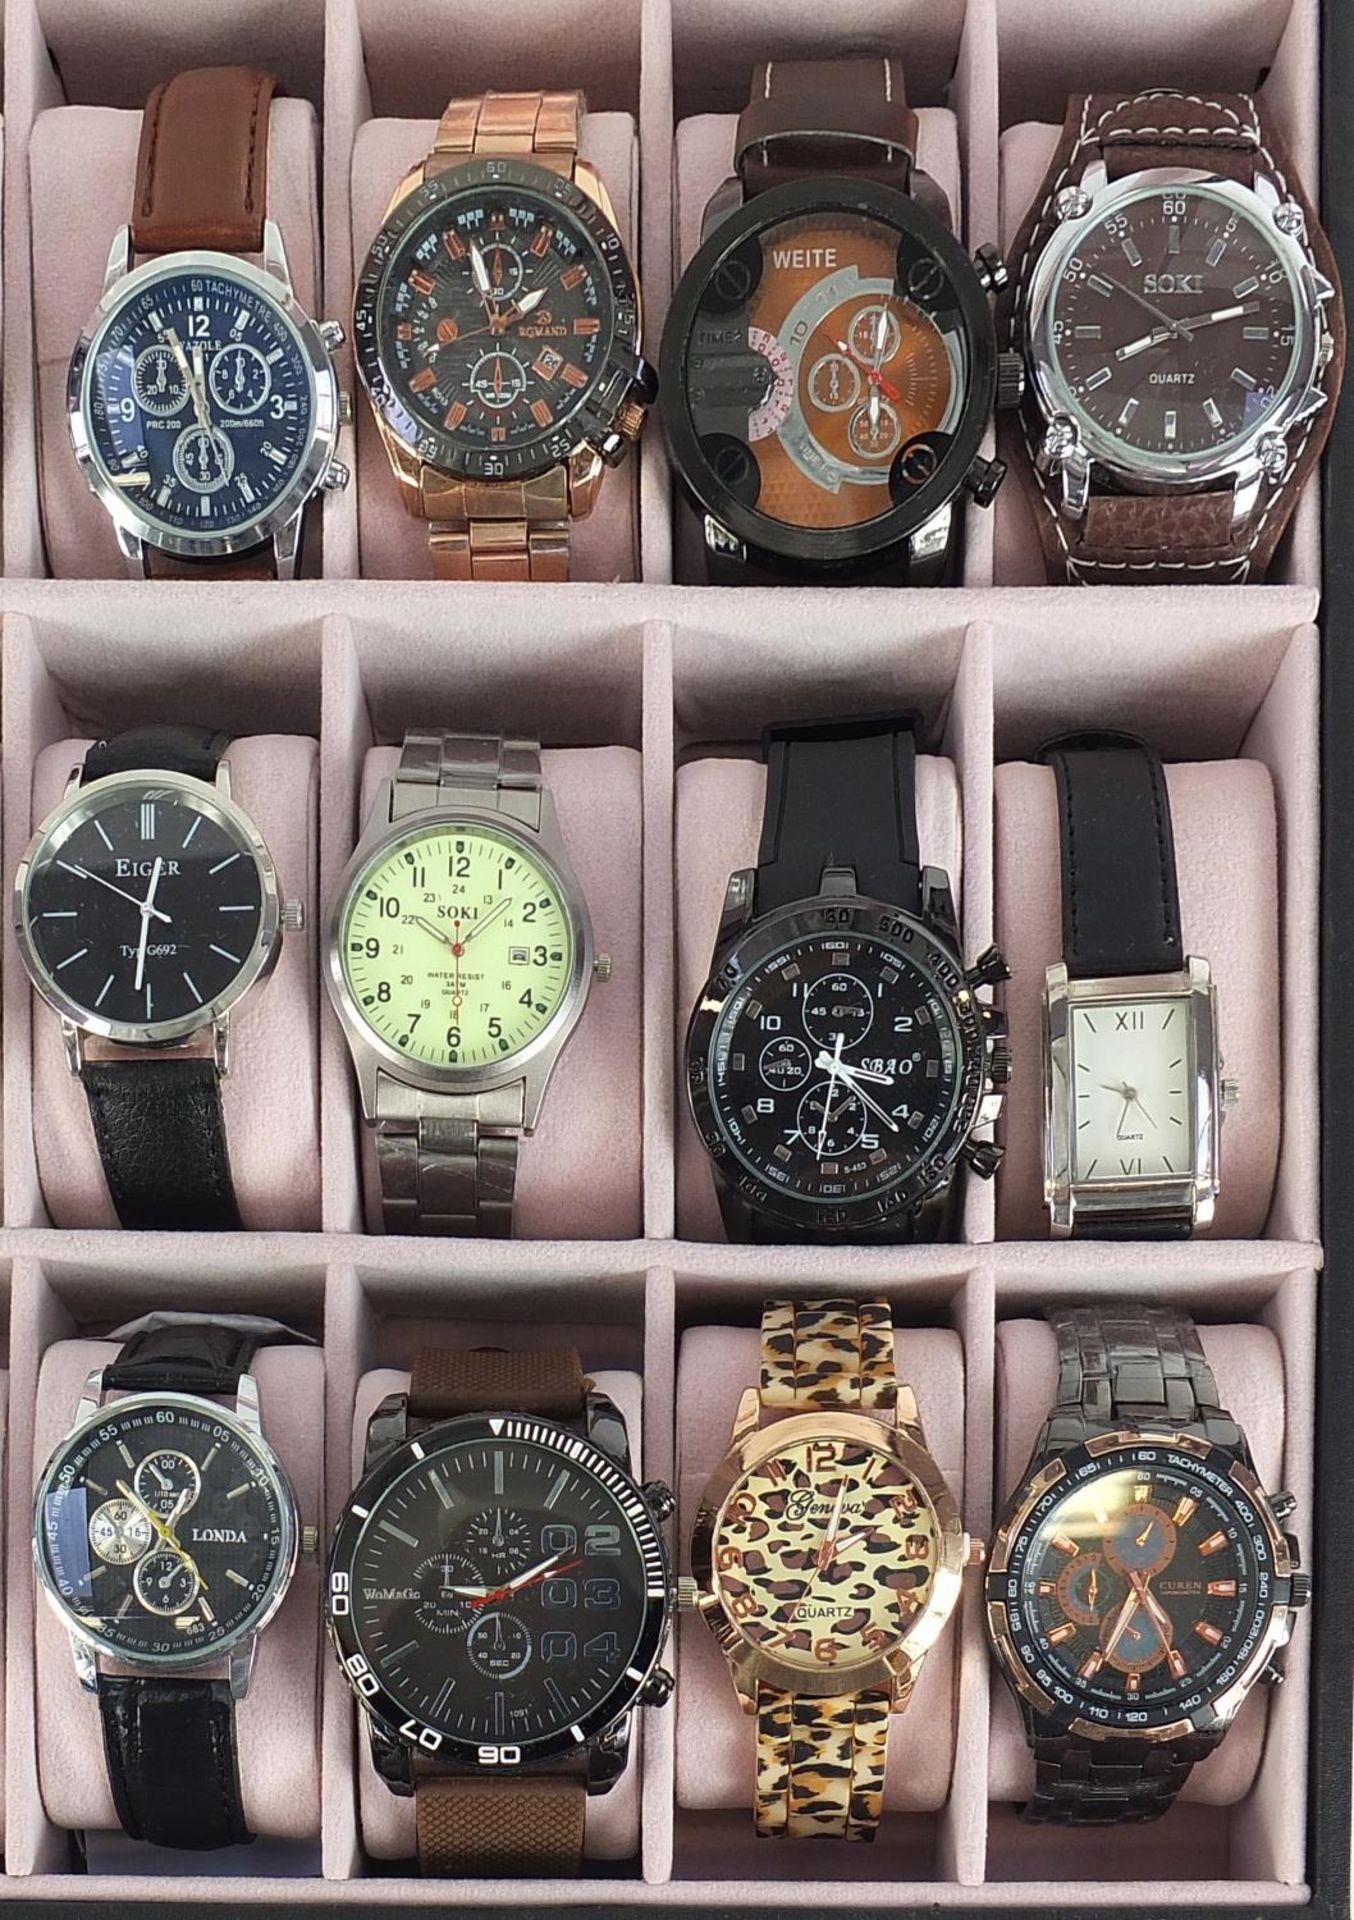 Twenty four Gentlemen's dress wristwatches including Rovite, Yazole and Soki, housed in a display - Image 3 of 8